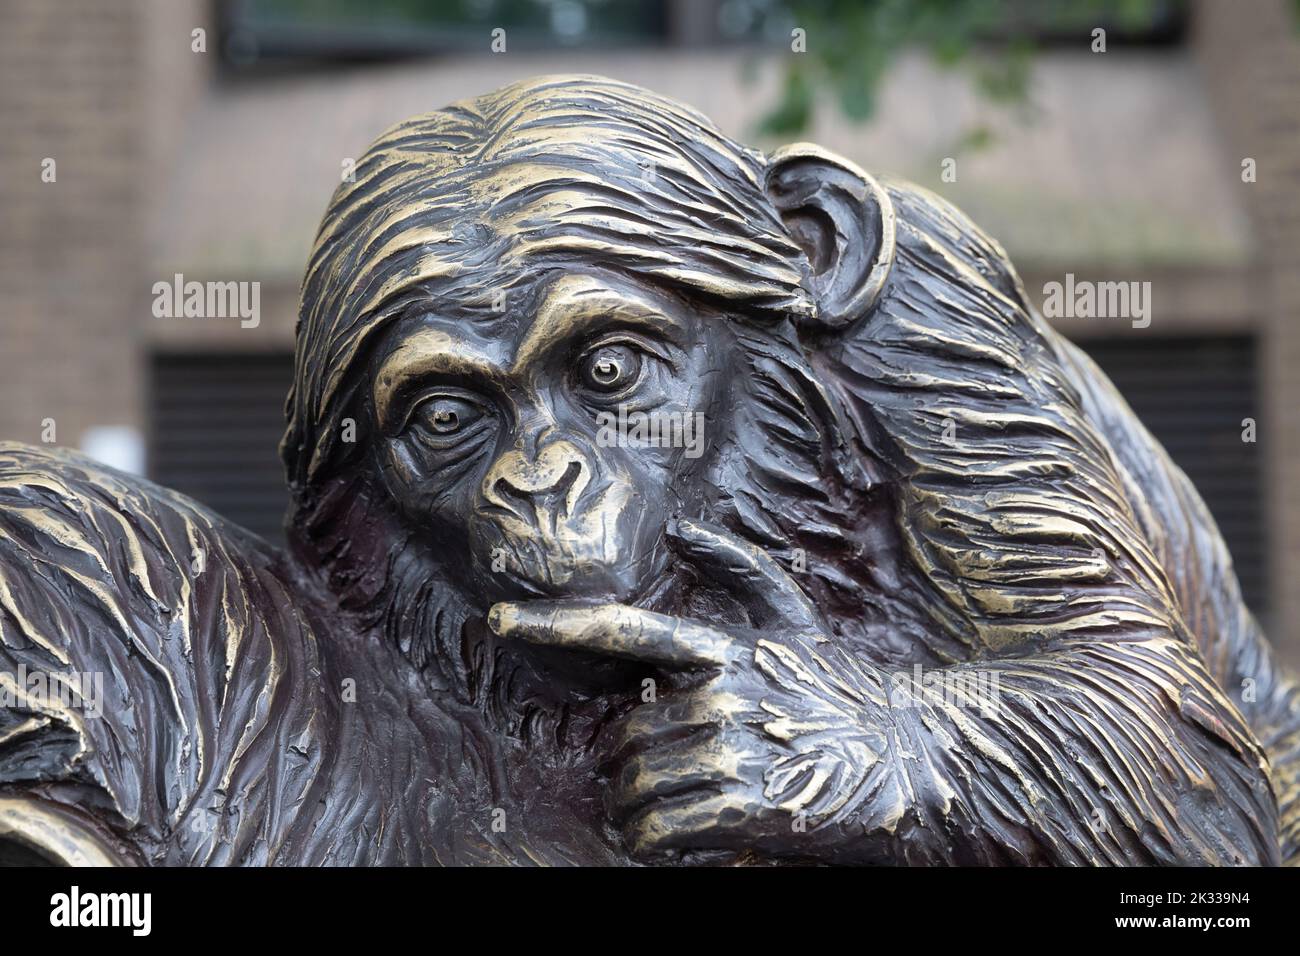 Chimps are Family outdoor exhibition in London Bridge City, London Stock Photo